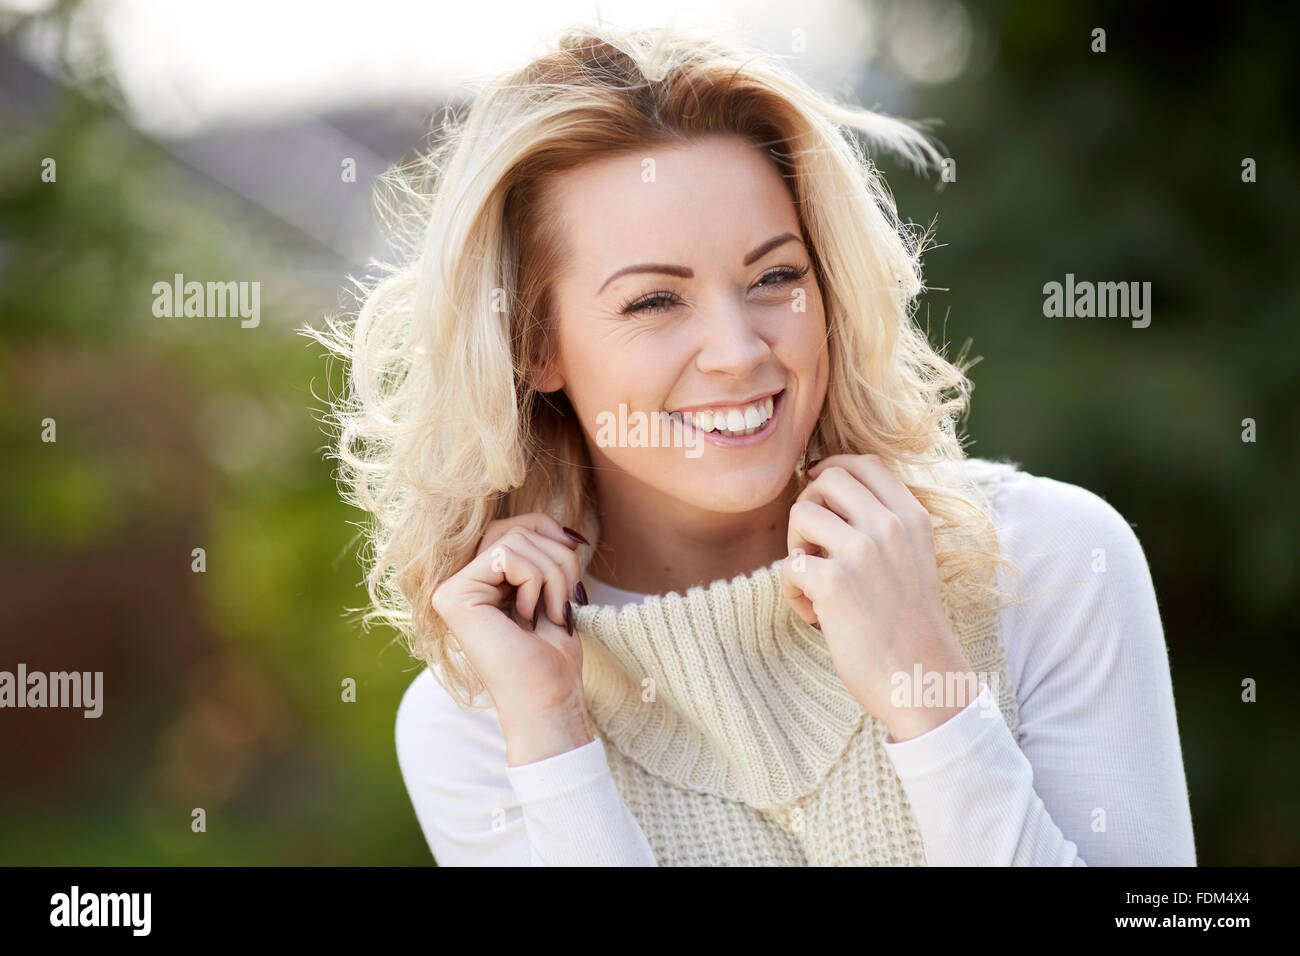 Portrait of pretty woman outdoors Stock Photo